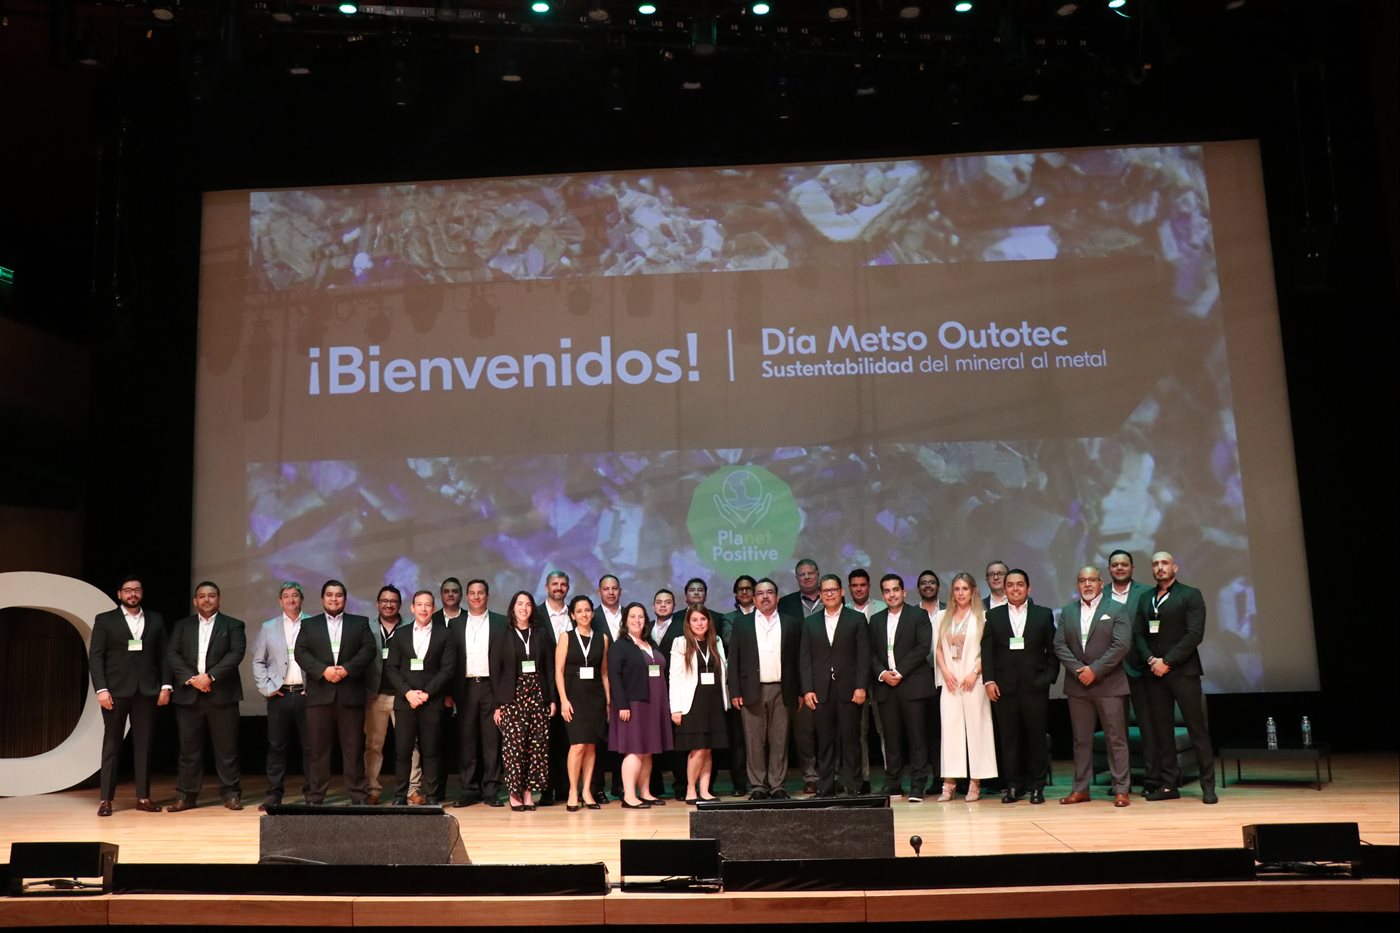 Group photo of Metso Outotec team